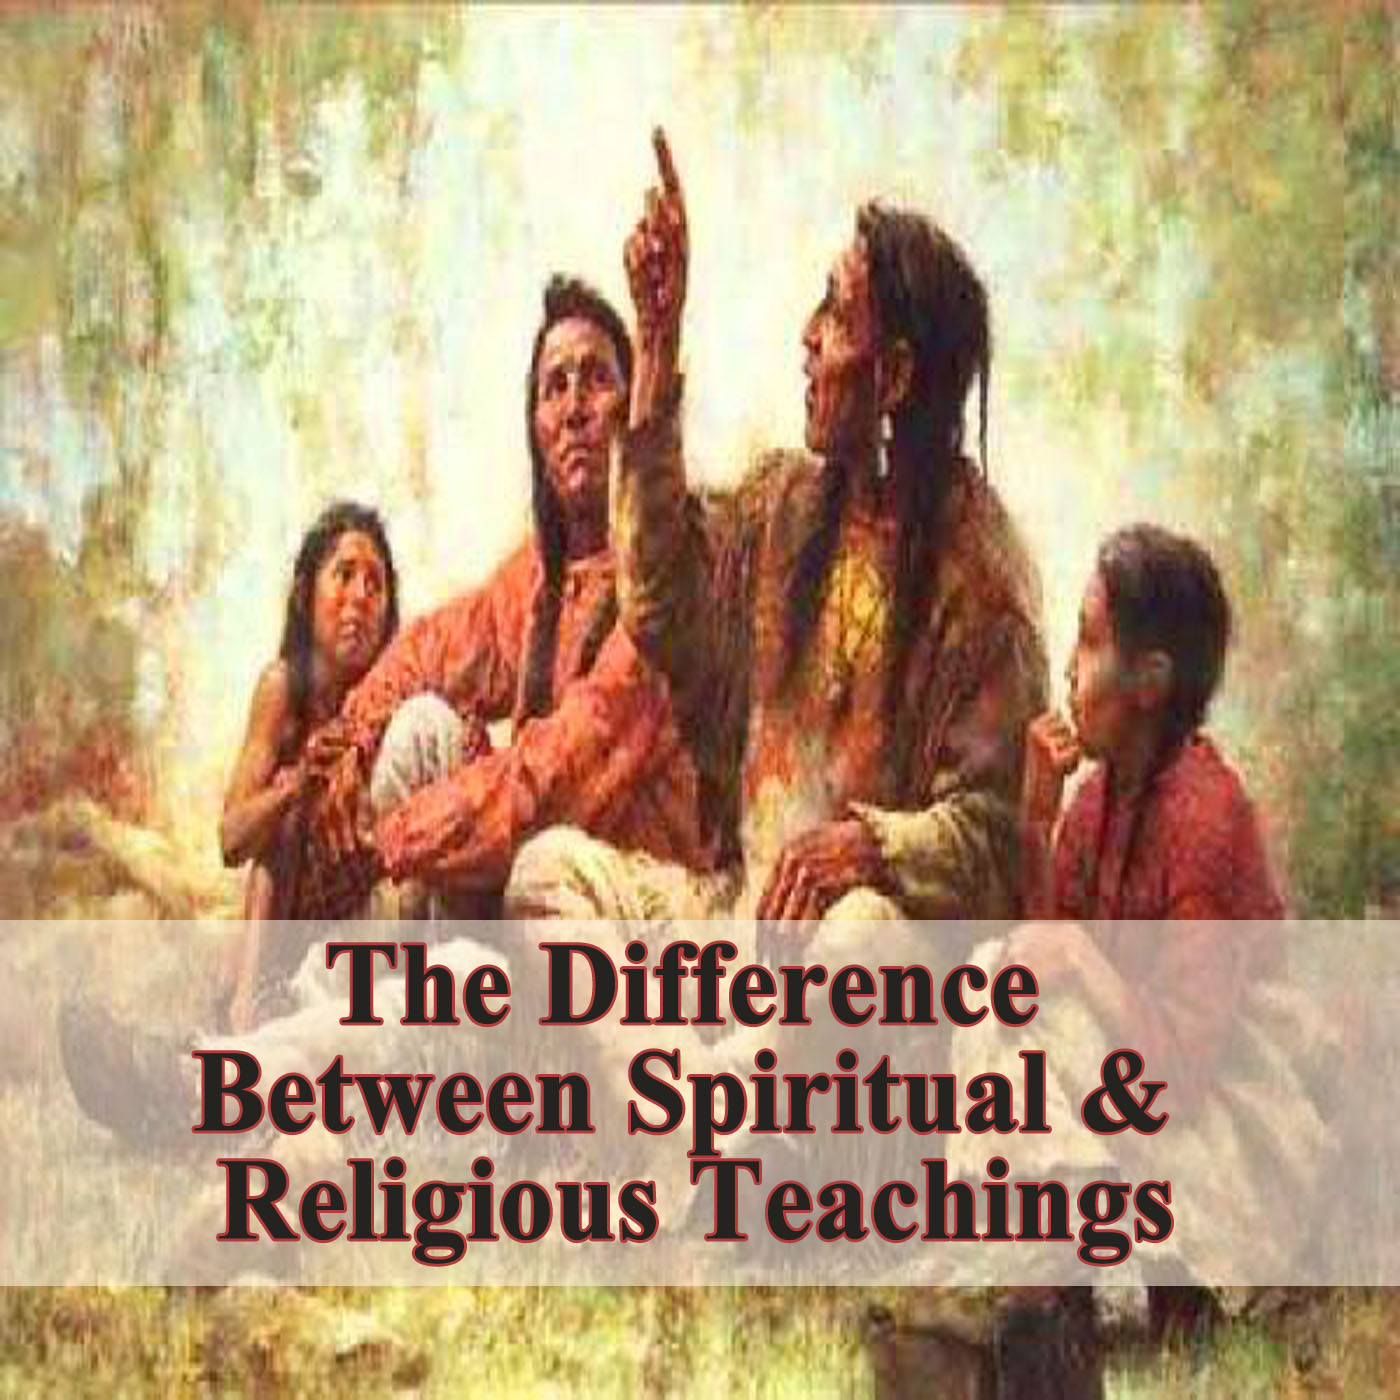 The difference between spiritual and religious energies on earth. 